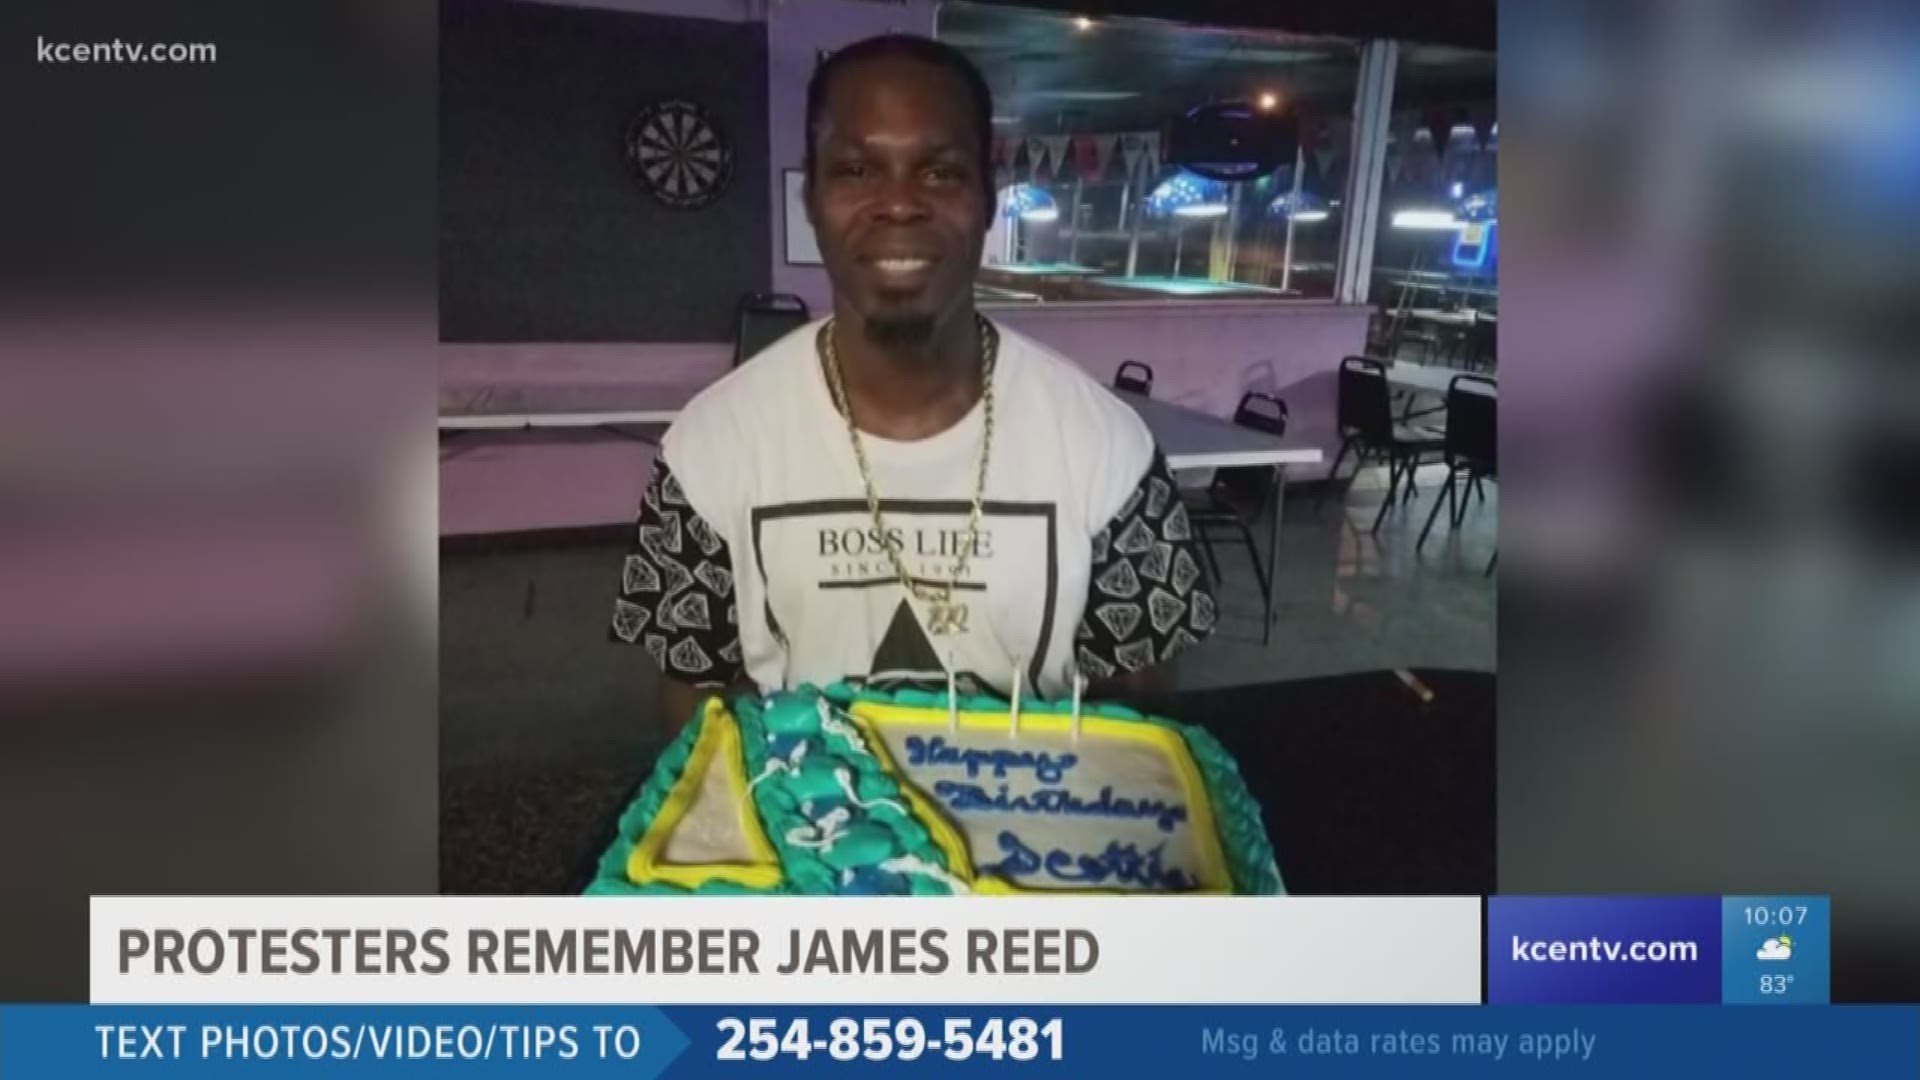 Central Texas protesters also commemorated James Reed, who was killed while Killeen PD served him a no-knock warrant.